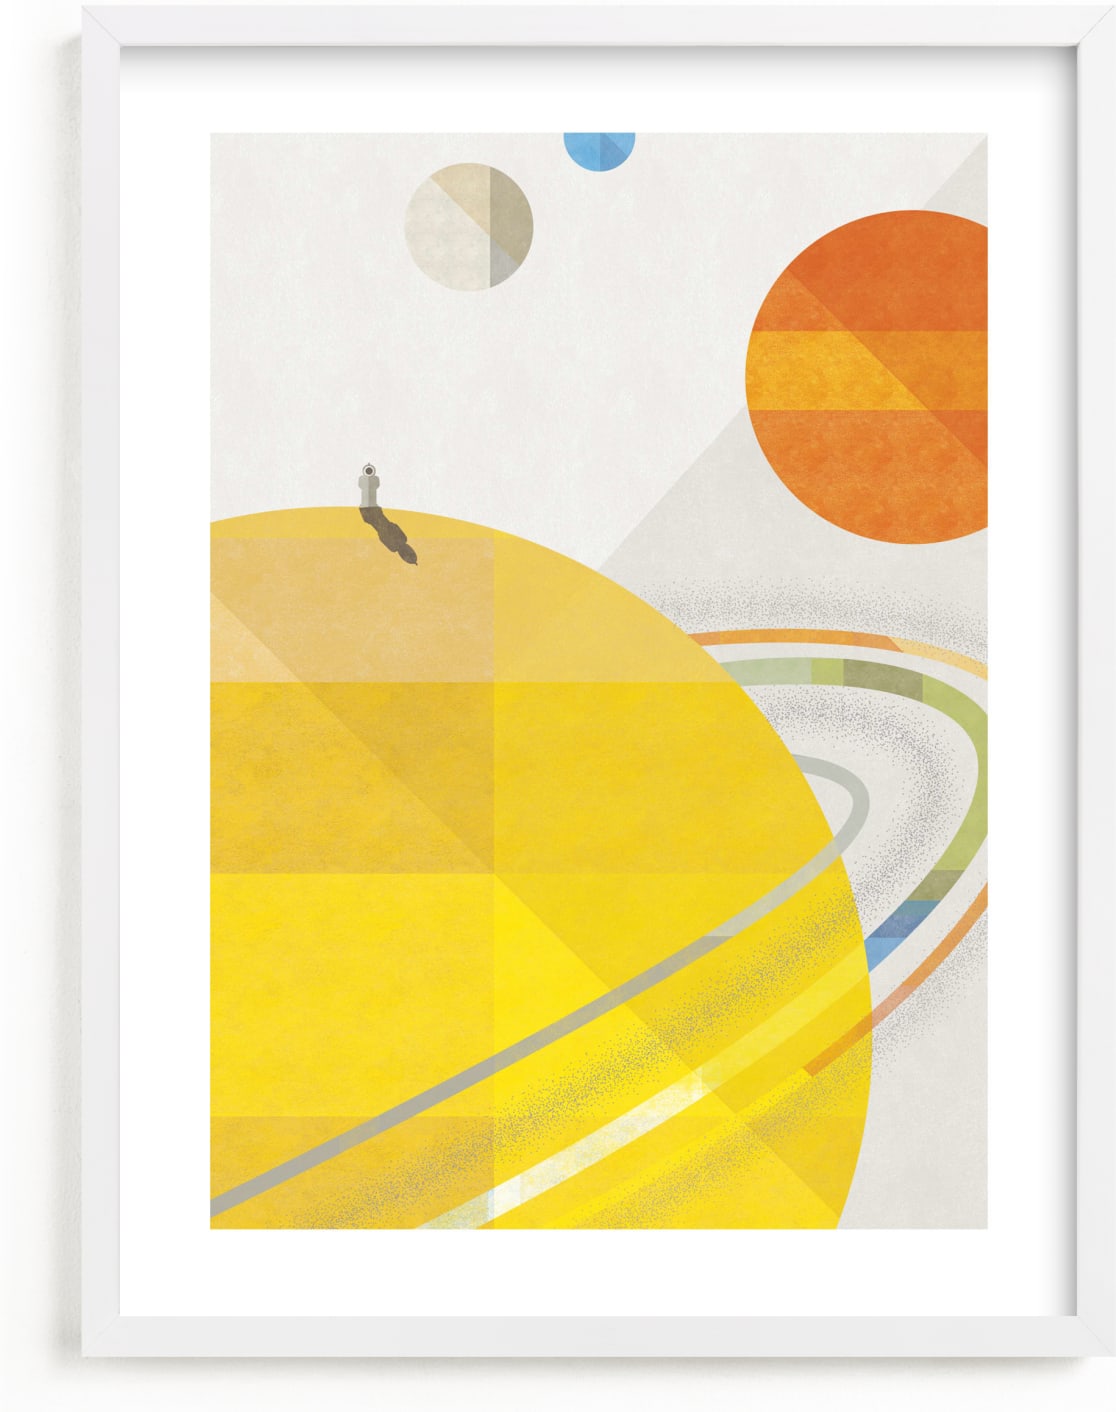 This is a colorful kids wall art by Robert and Stella called Space Voyage.